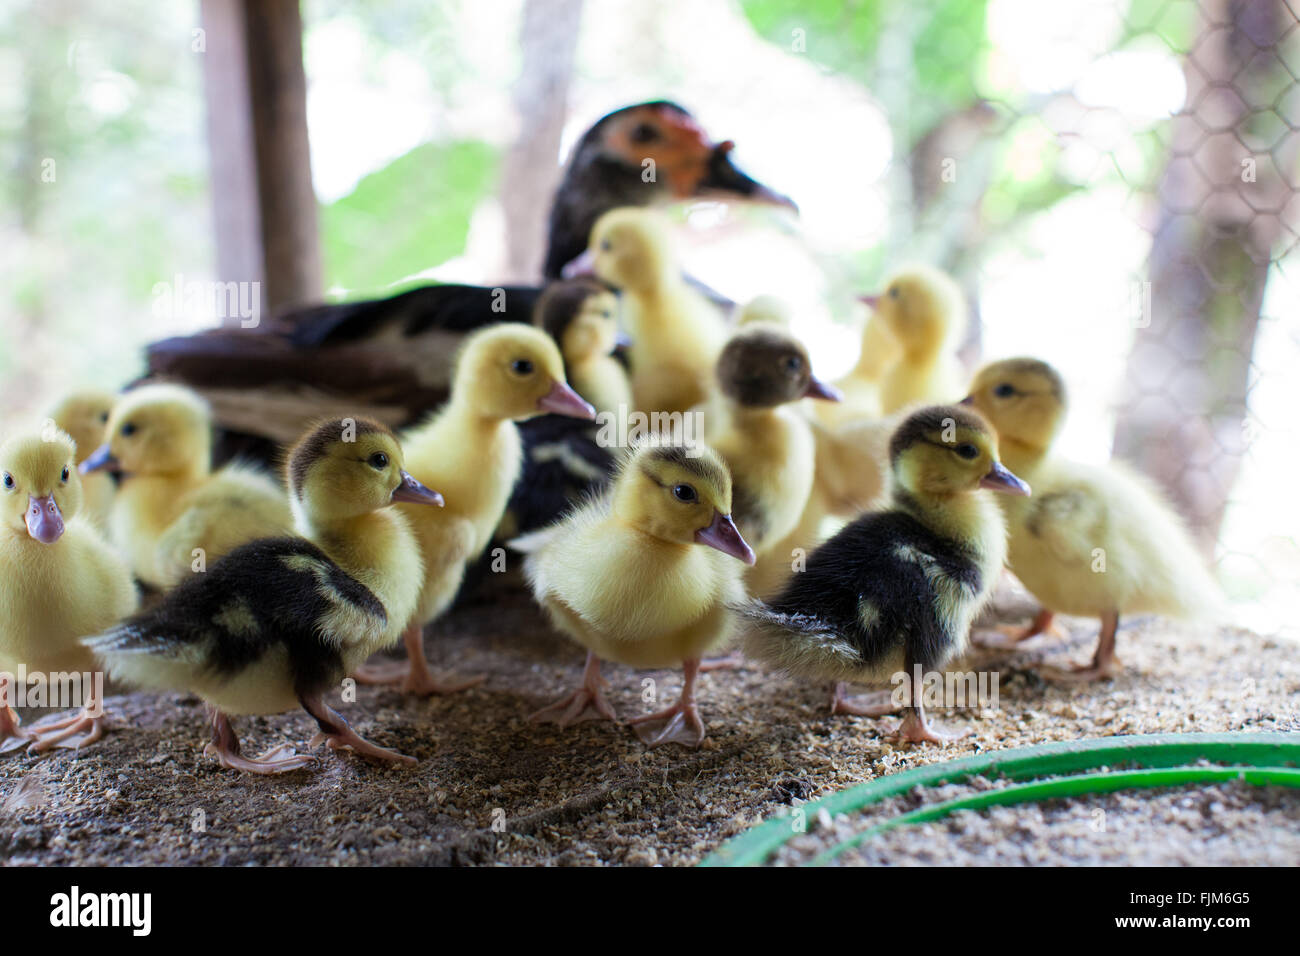 A mother duck and her ducklings  on a poultry farm Tanzania Stock Photo